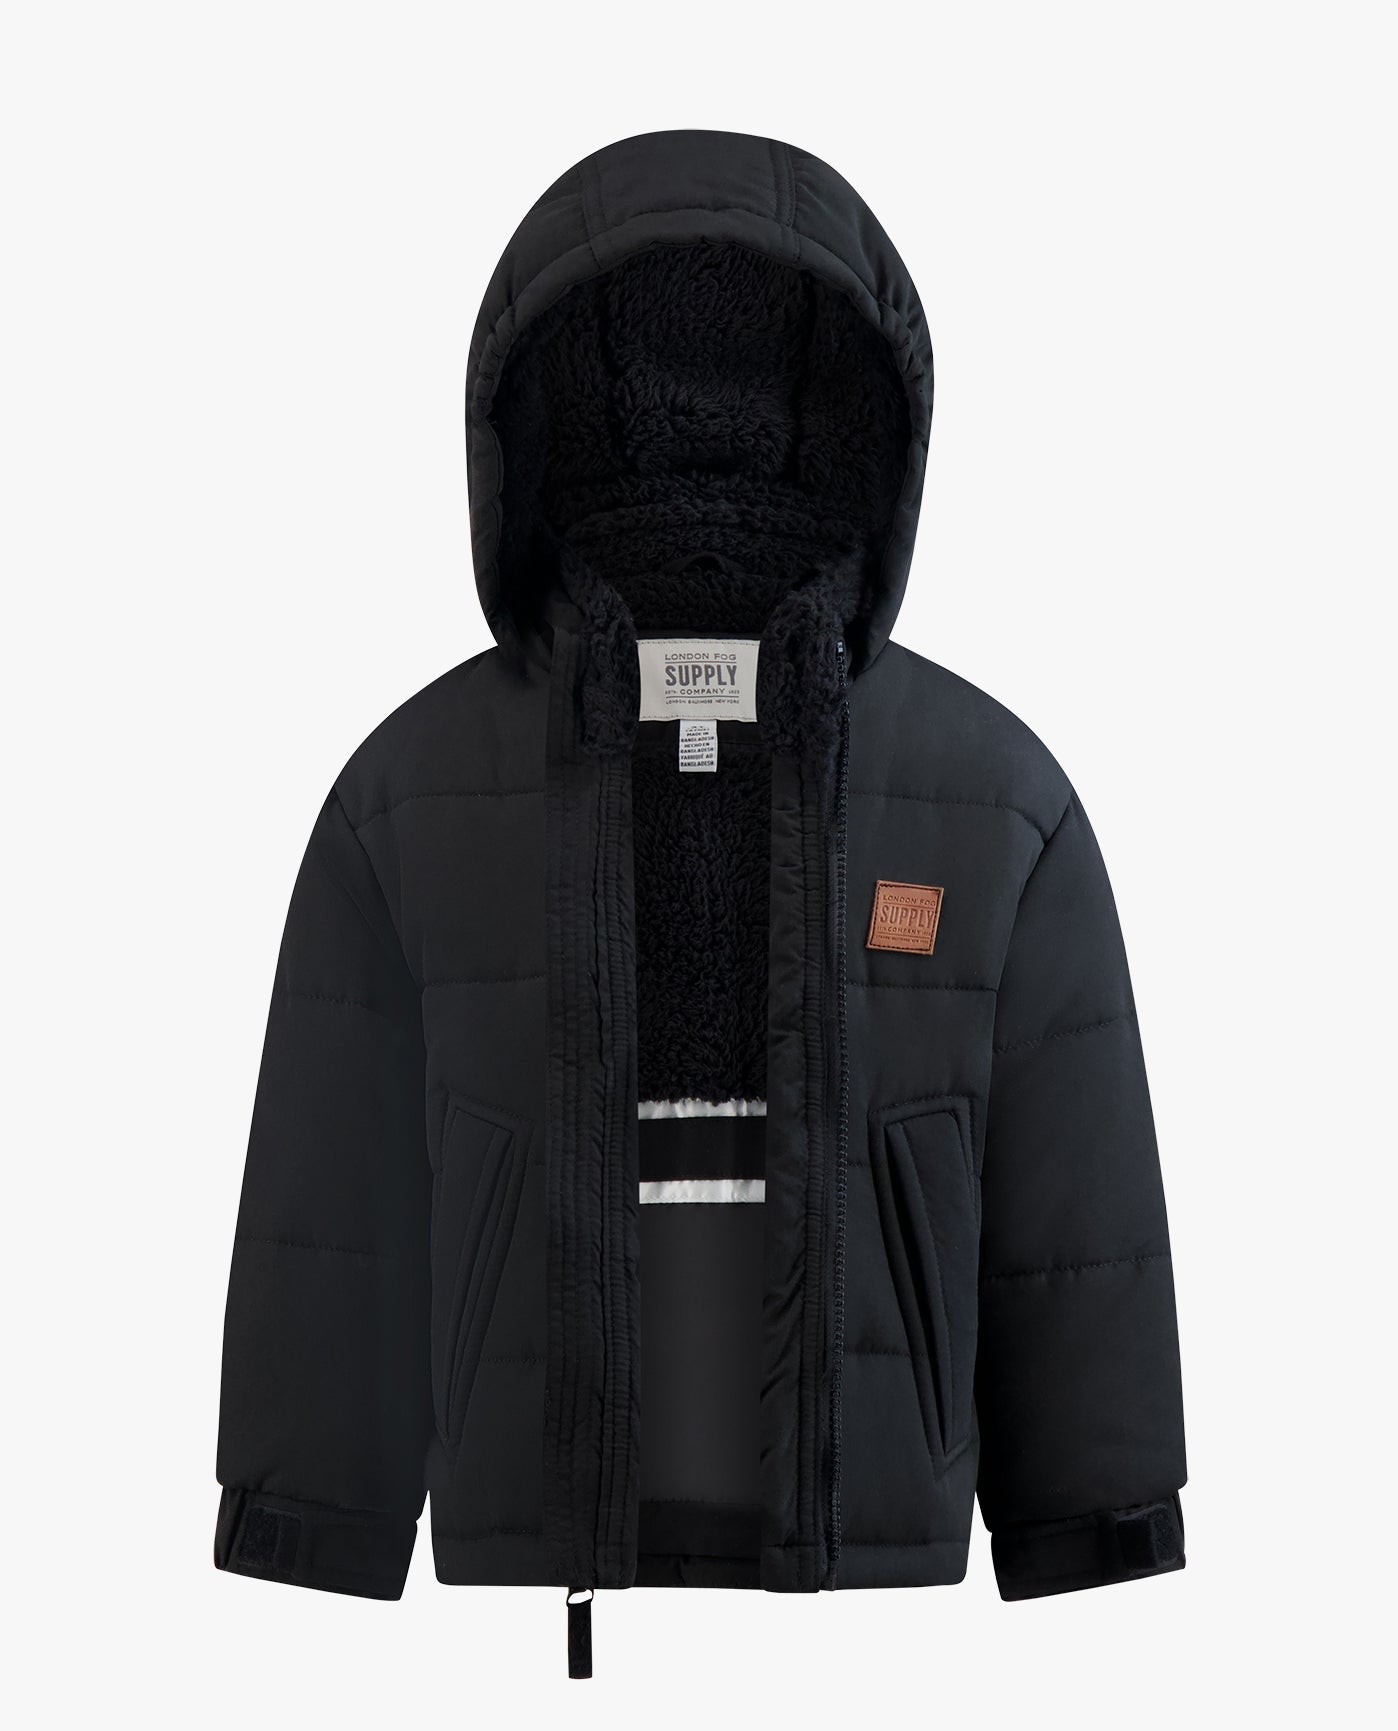 Detail View Of TODDLER BOYS ZIP-FRONT HOODED SHERPA LINED PUFFER | BLACK